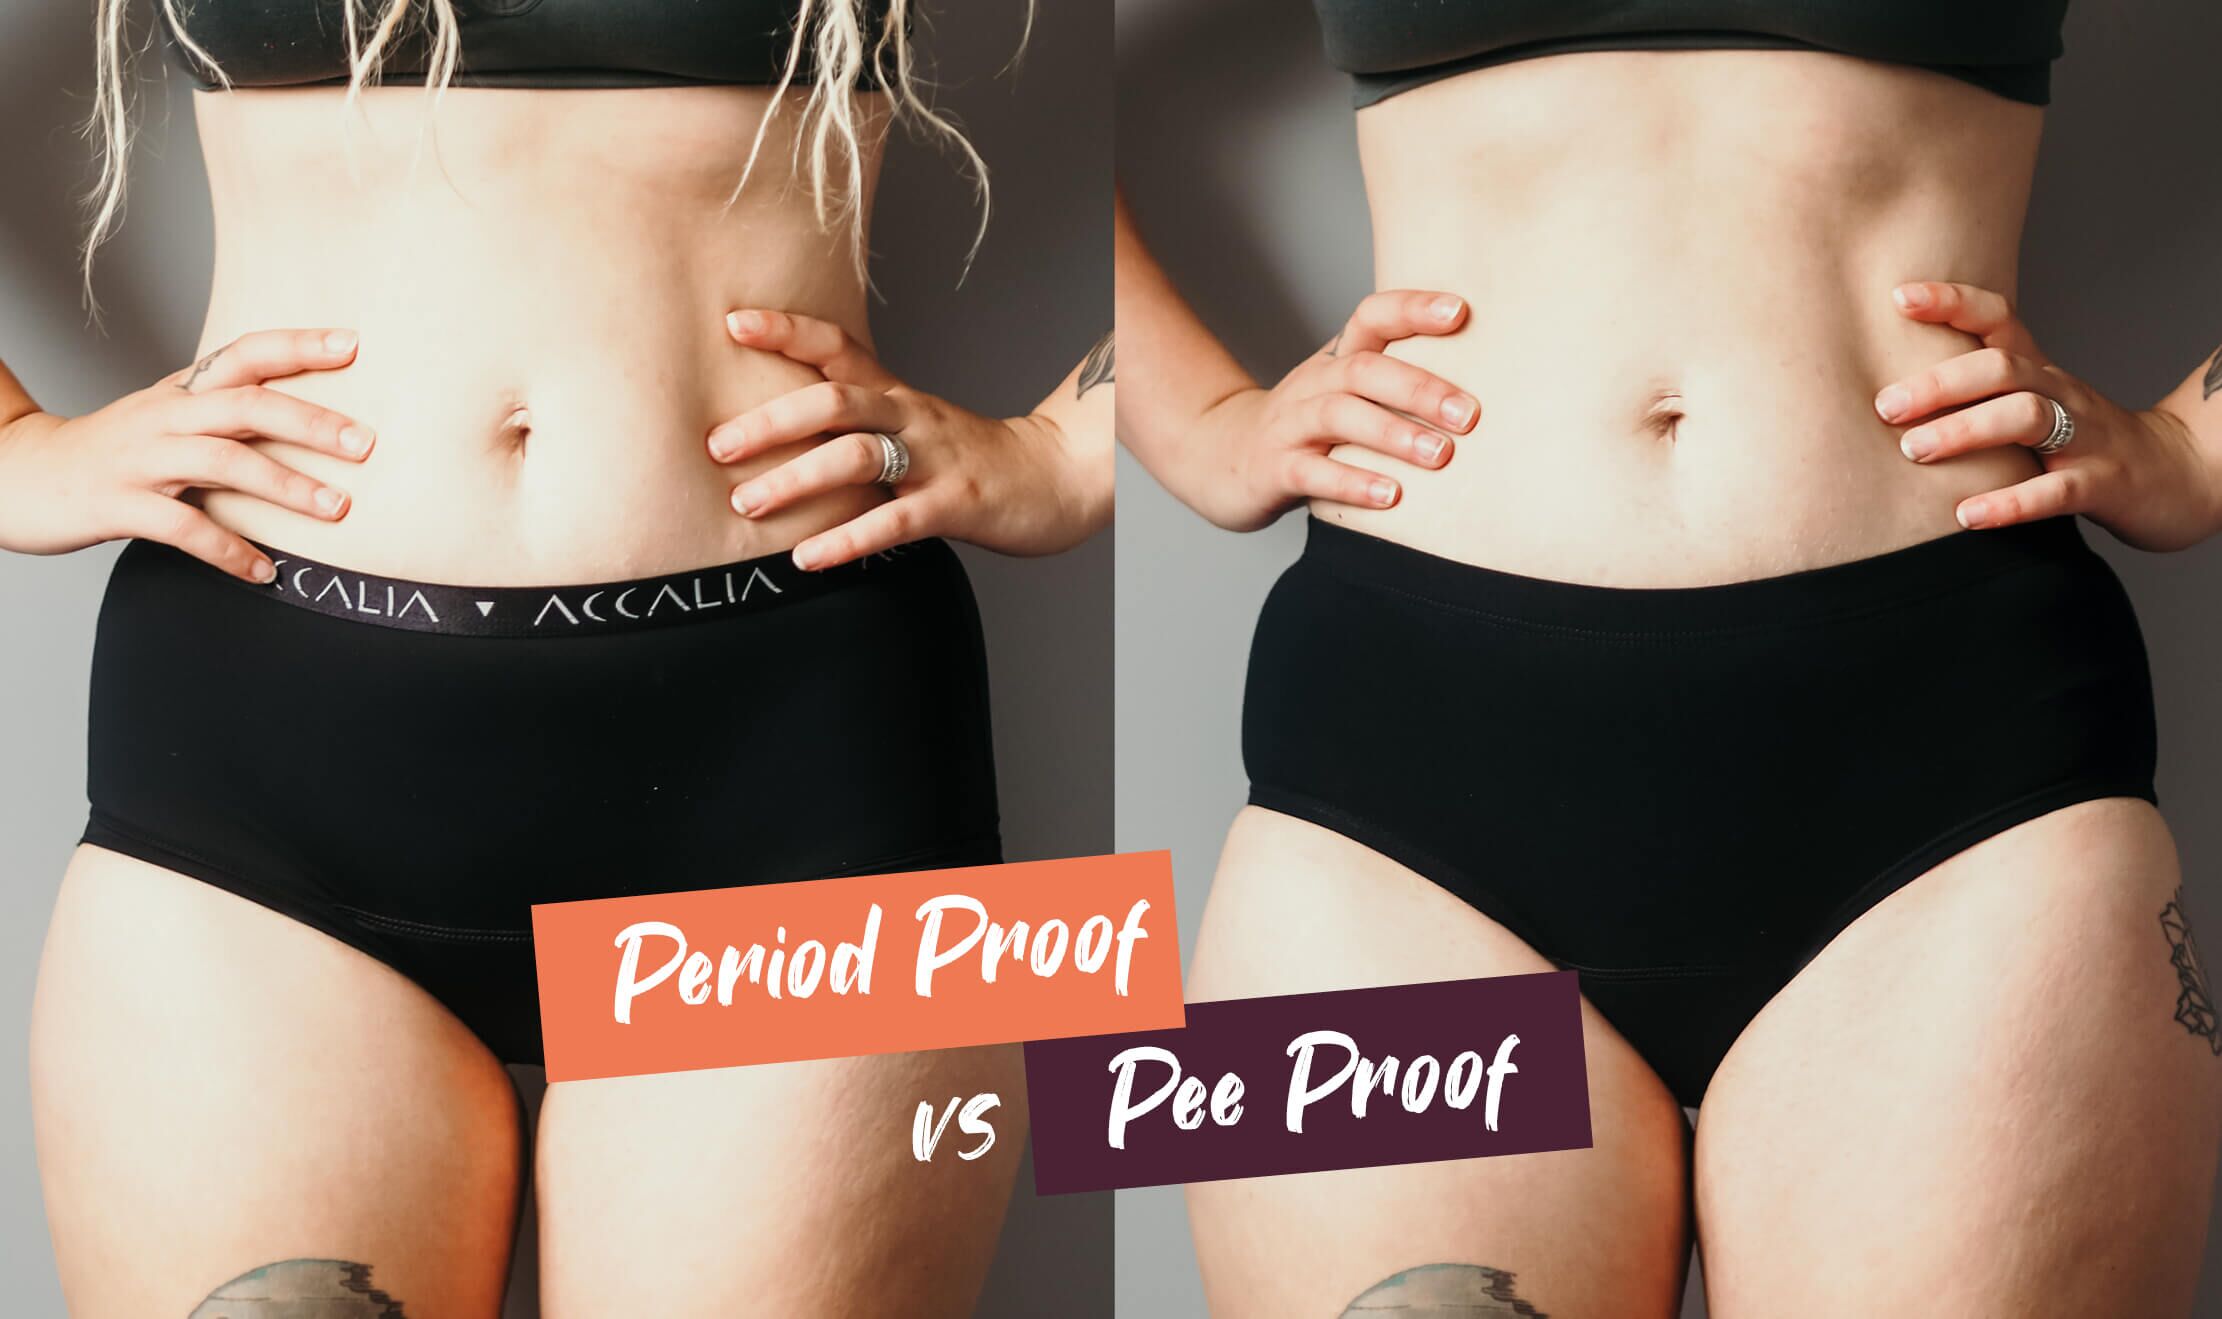 What's the difference between Period Proof & Pee Proof undies?